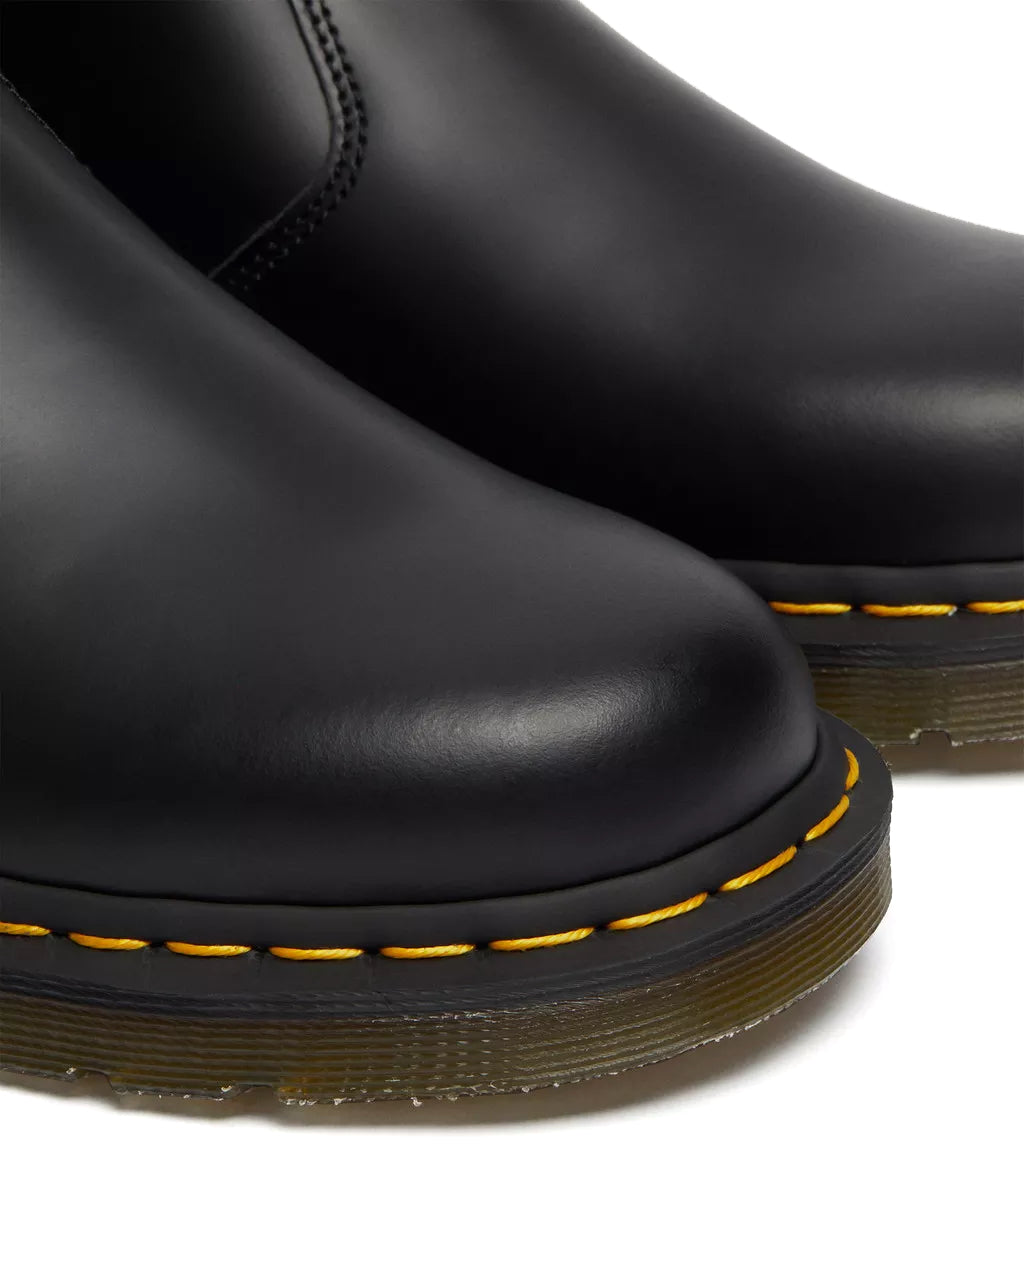 Detail shot of a pair of mid-ankle Dr. Martens black leather chelsea boots.